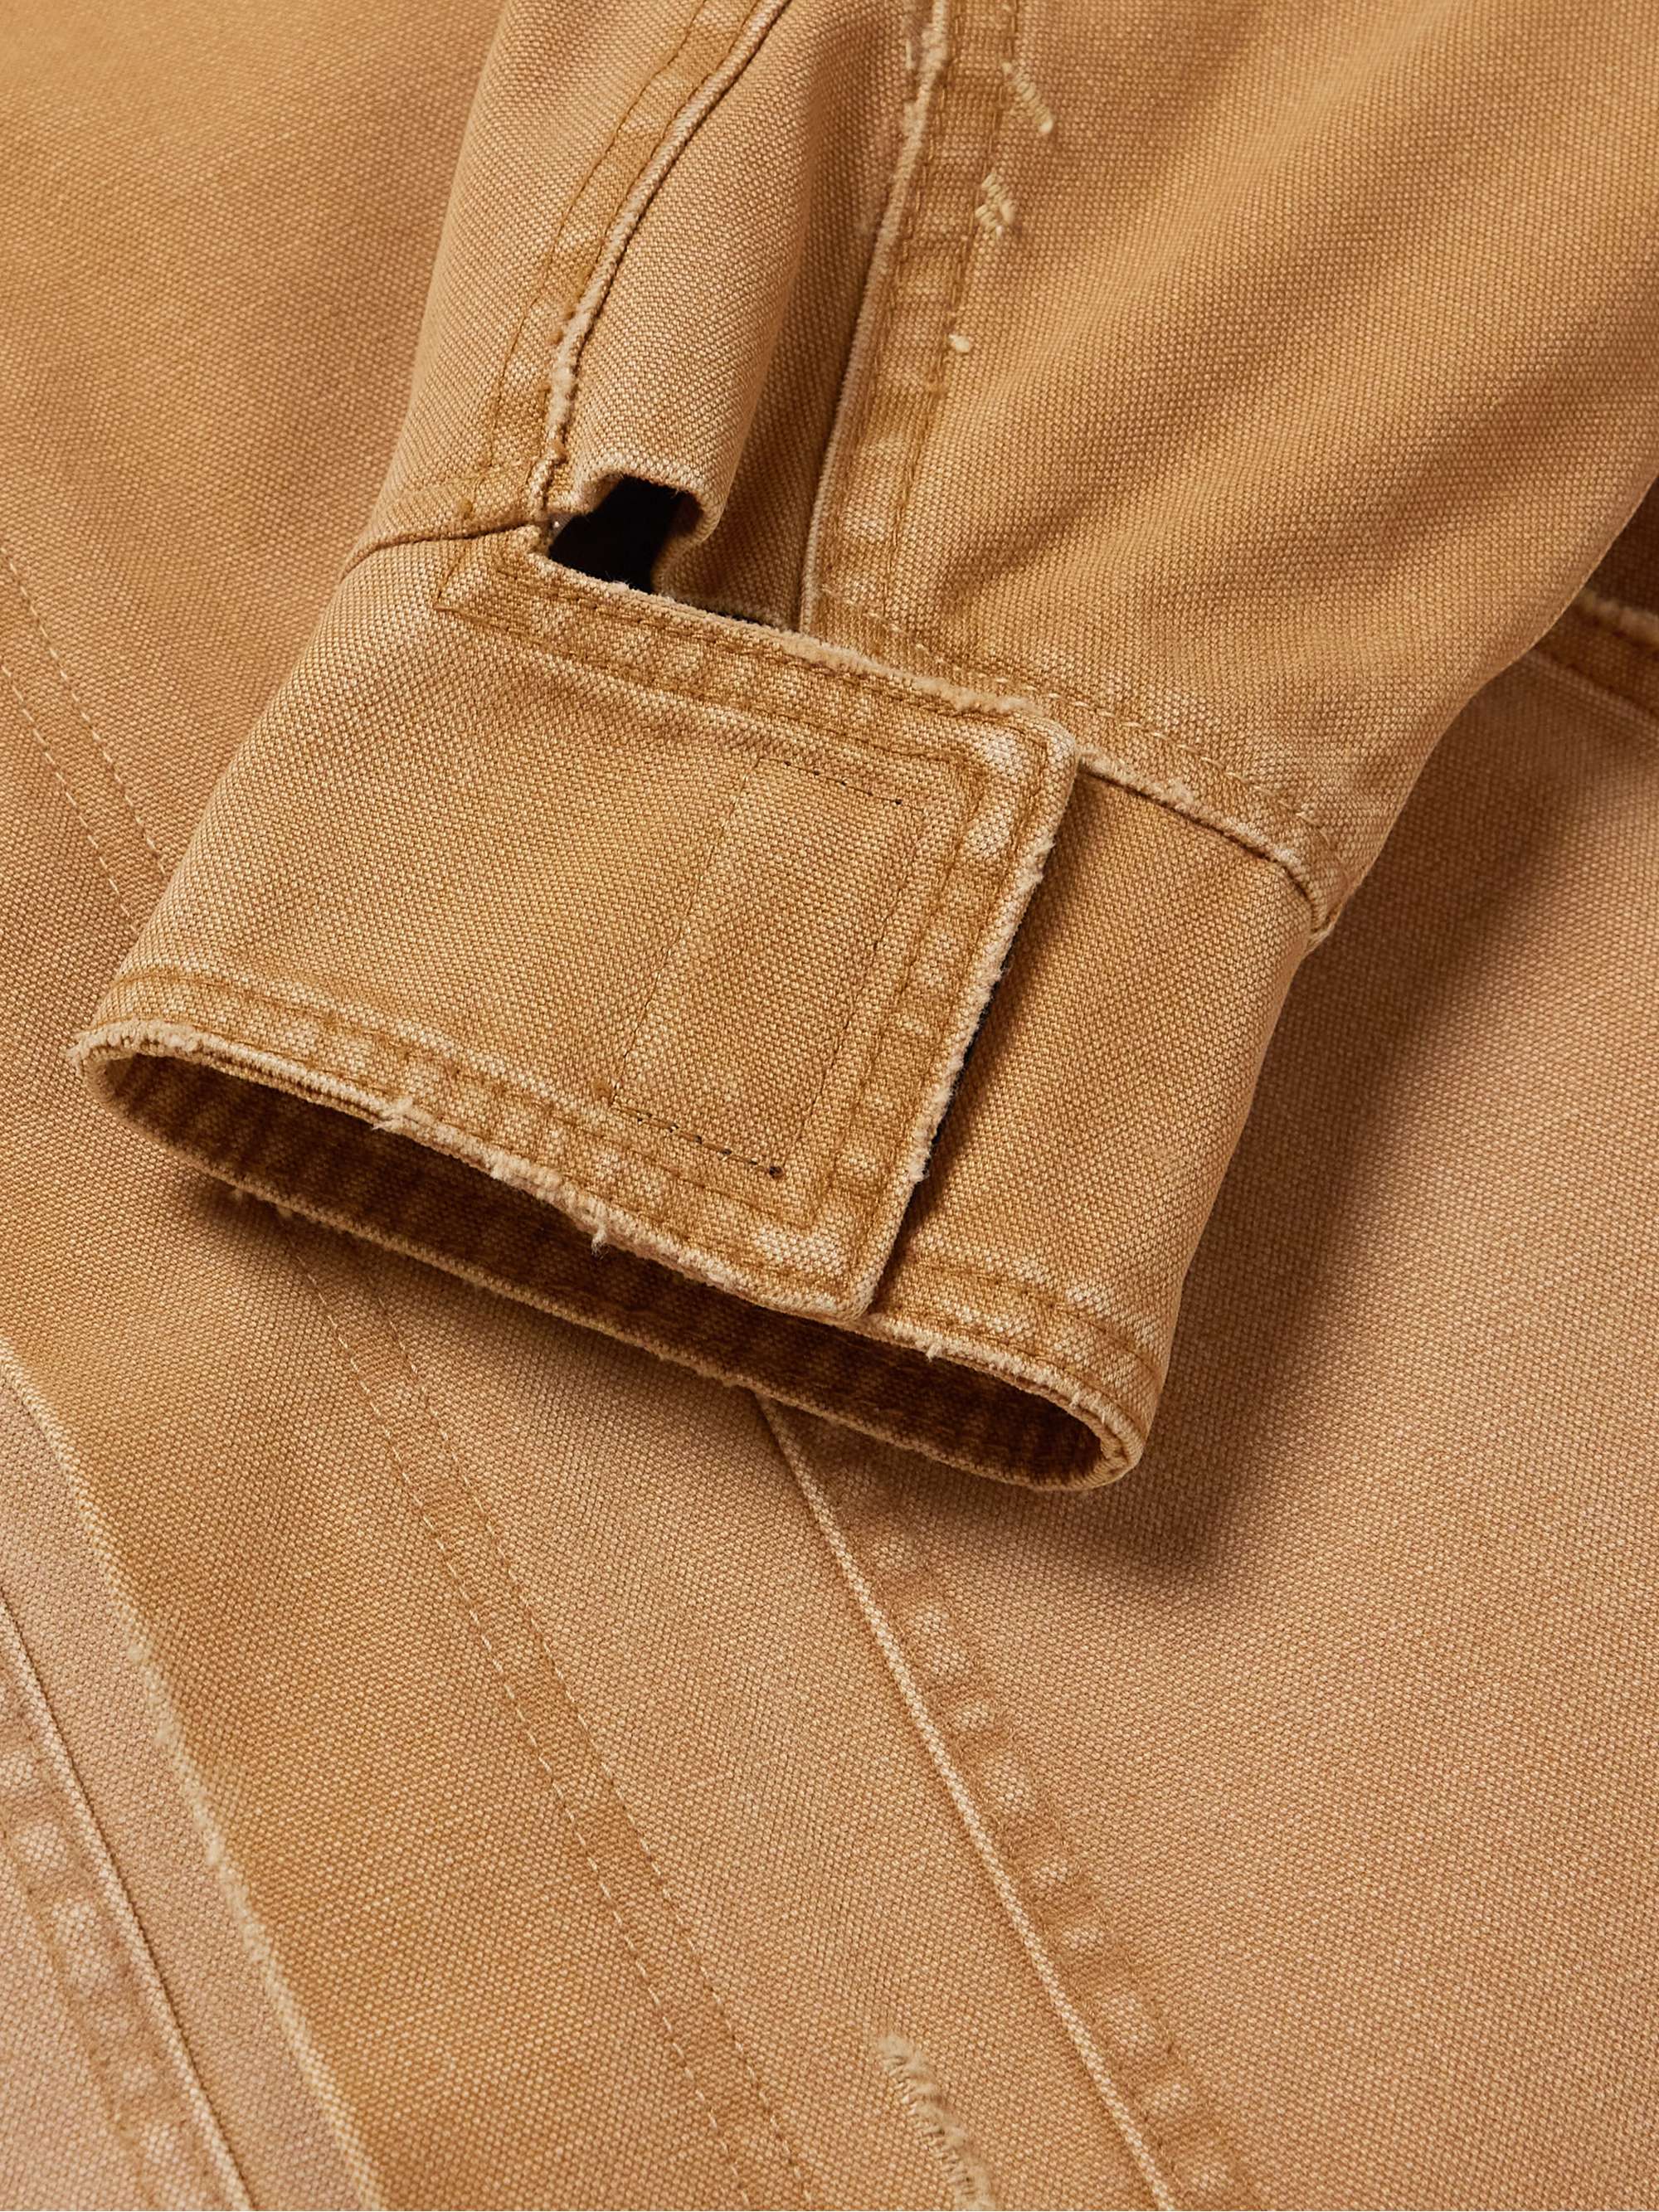 FEAR OF GOD Suede-Trimmed Stone-Washed Cotton-Canvas Jacket